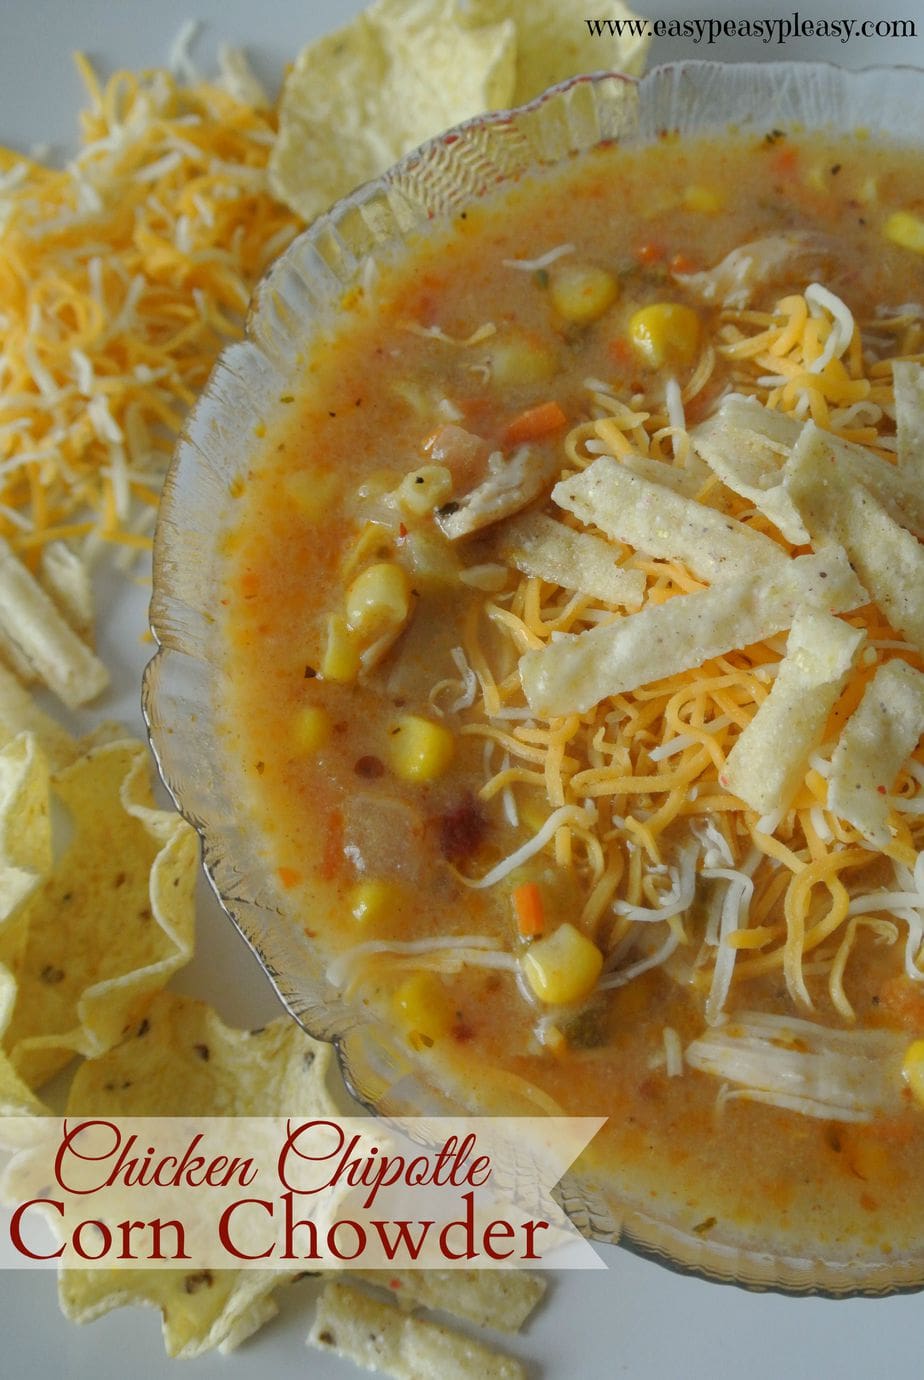 This is the perfect spicy and deliciously easy soup on a cold day. Chicken Chipotle Corn Chowder is my go to Fall and Winter dish.